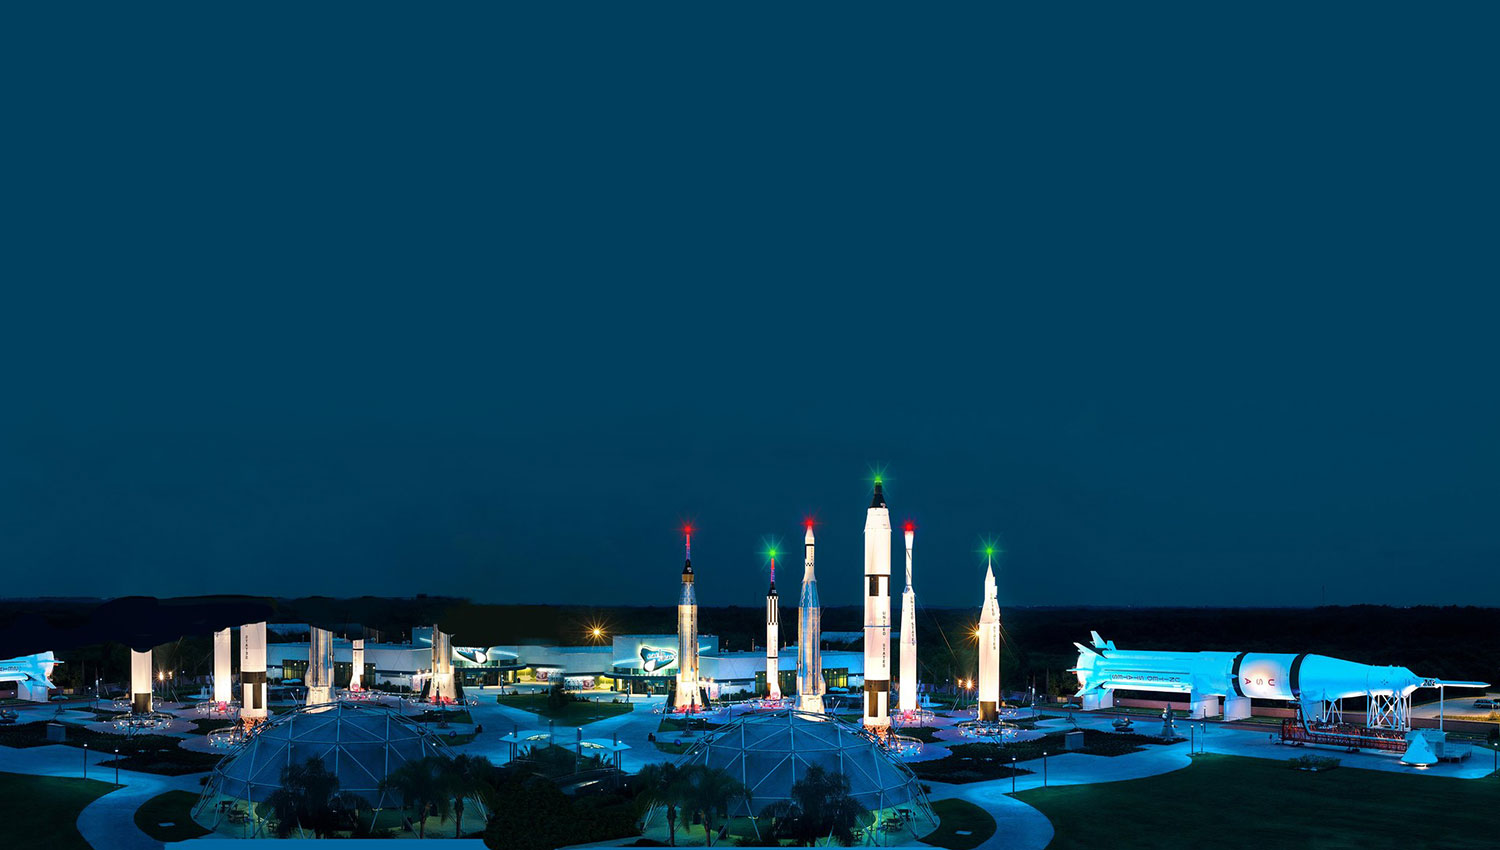 Kennedy Space Center which features a number of incredible exhibits and displays